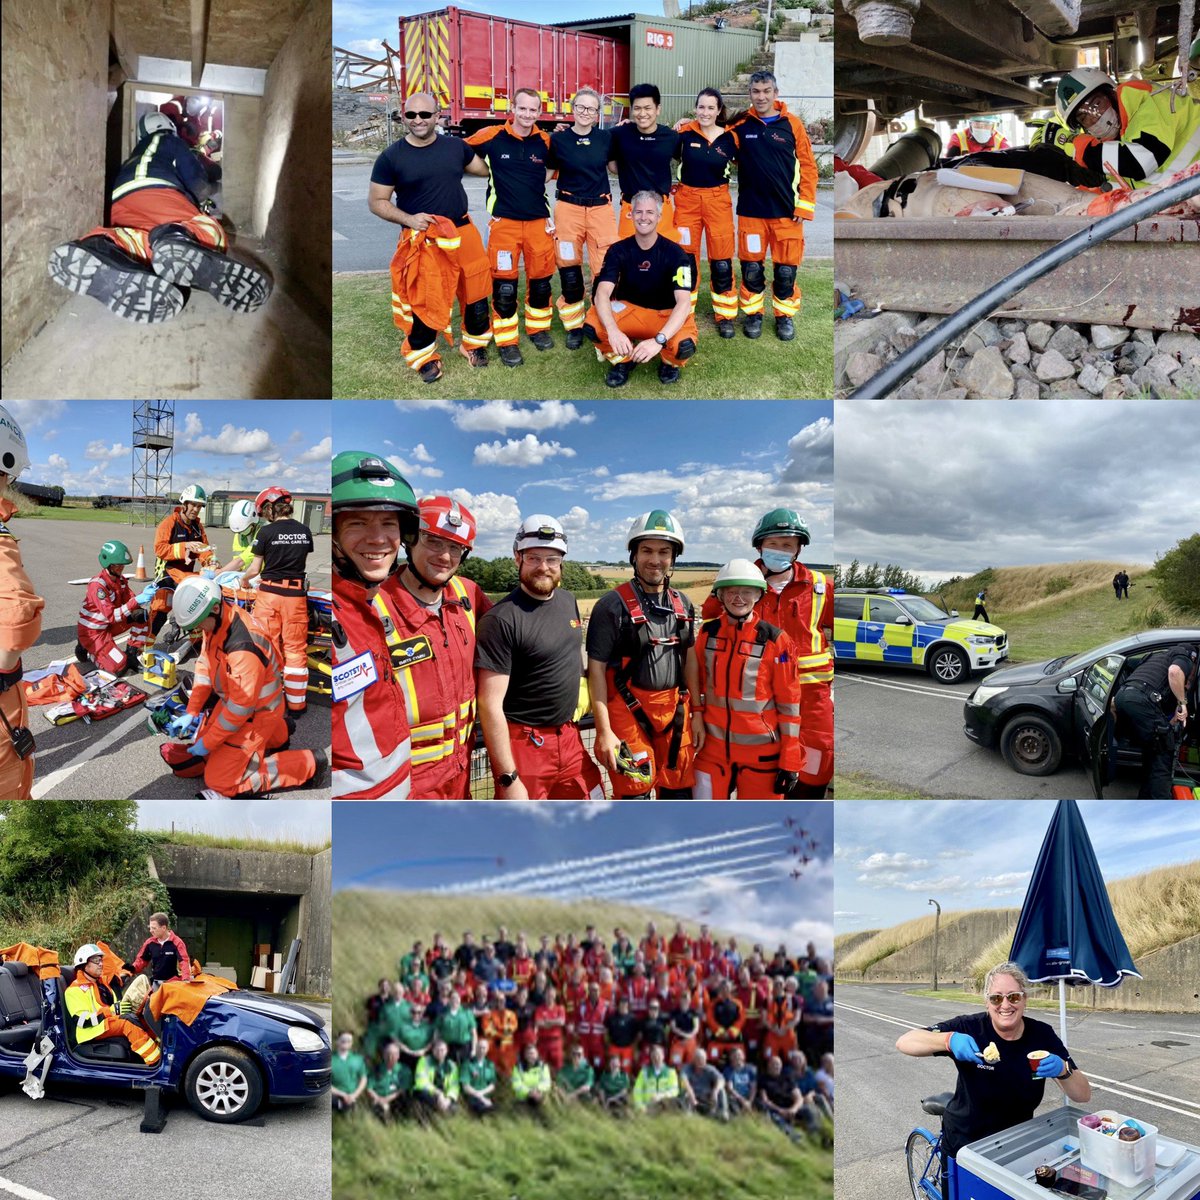 On a regional course for two weeks…here are the highlights from the @ibtphem course last week. Great simulations facilitated by a fabulous multidisciplinary team! Thank you @RodMack2 and team for making this happen #phem @RAFWaddington